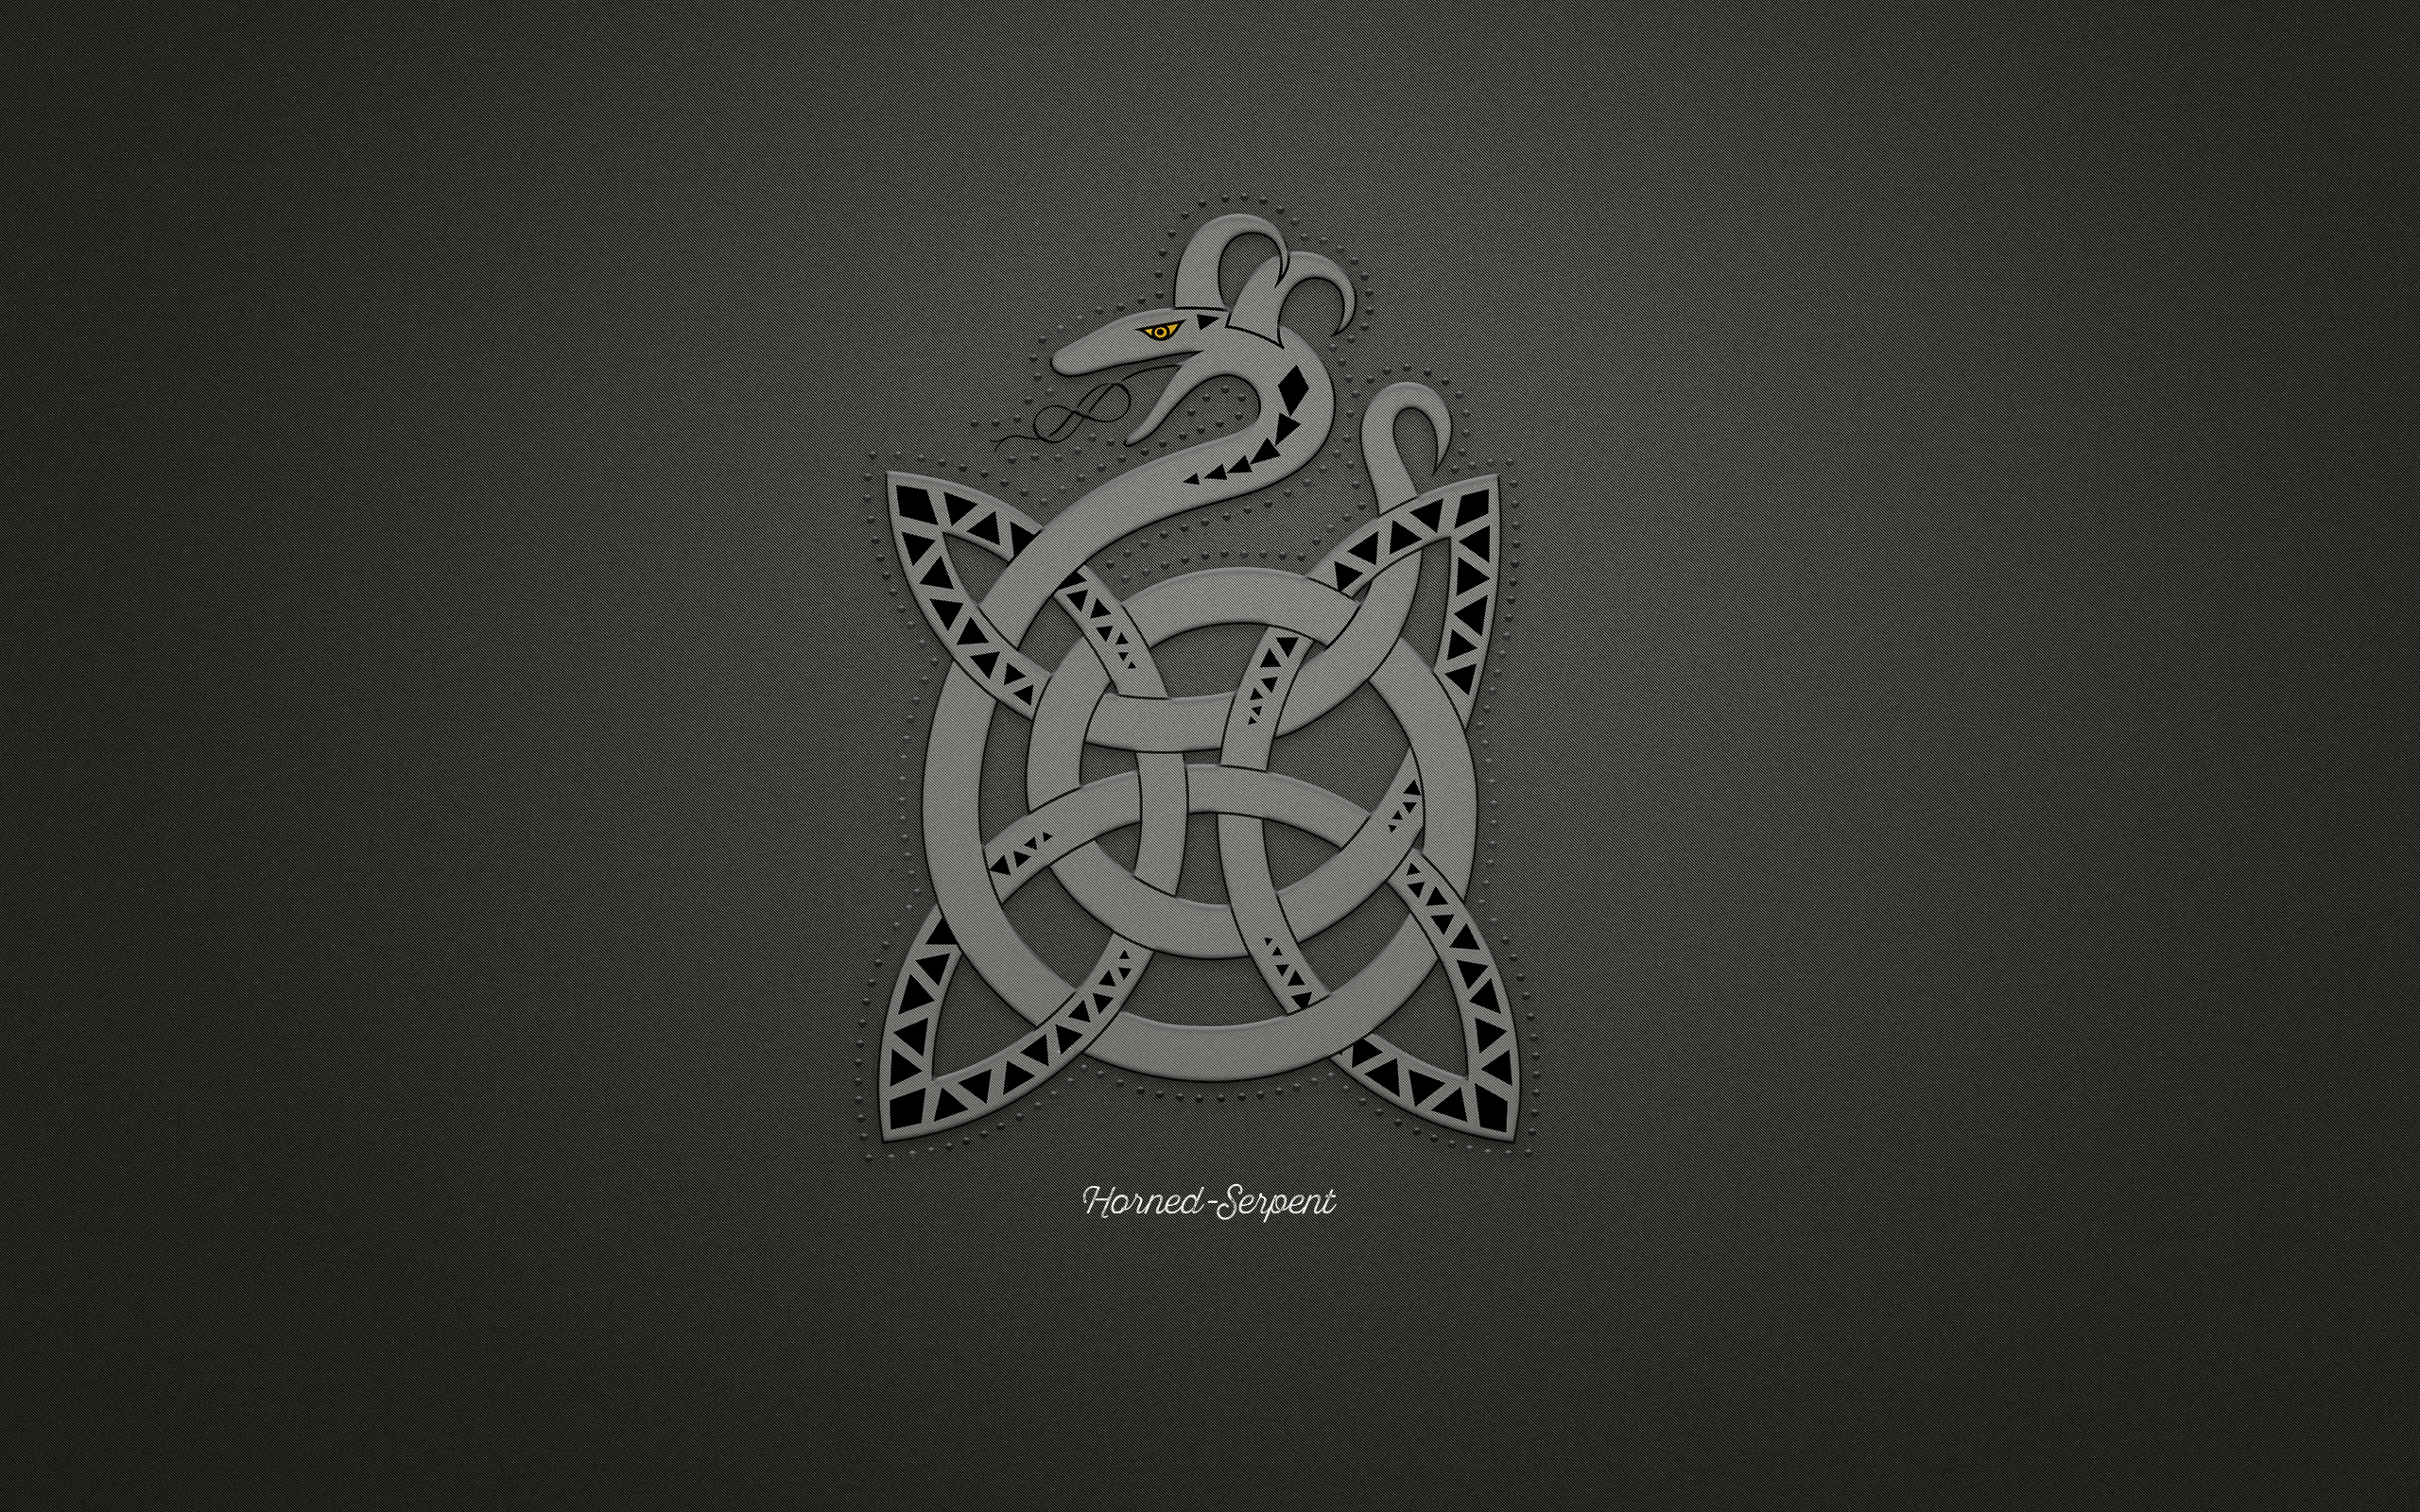 House Horned Serpent Potter World. Ilvermorny, Horned serpent ilvermorny, Harry potter lock screen